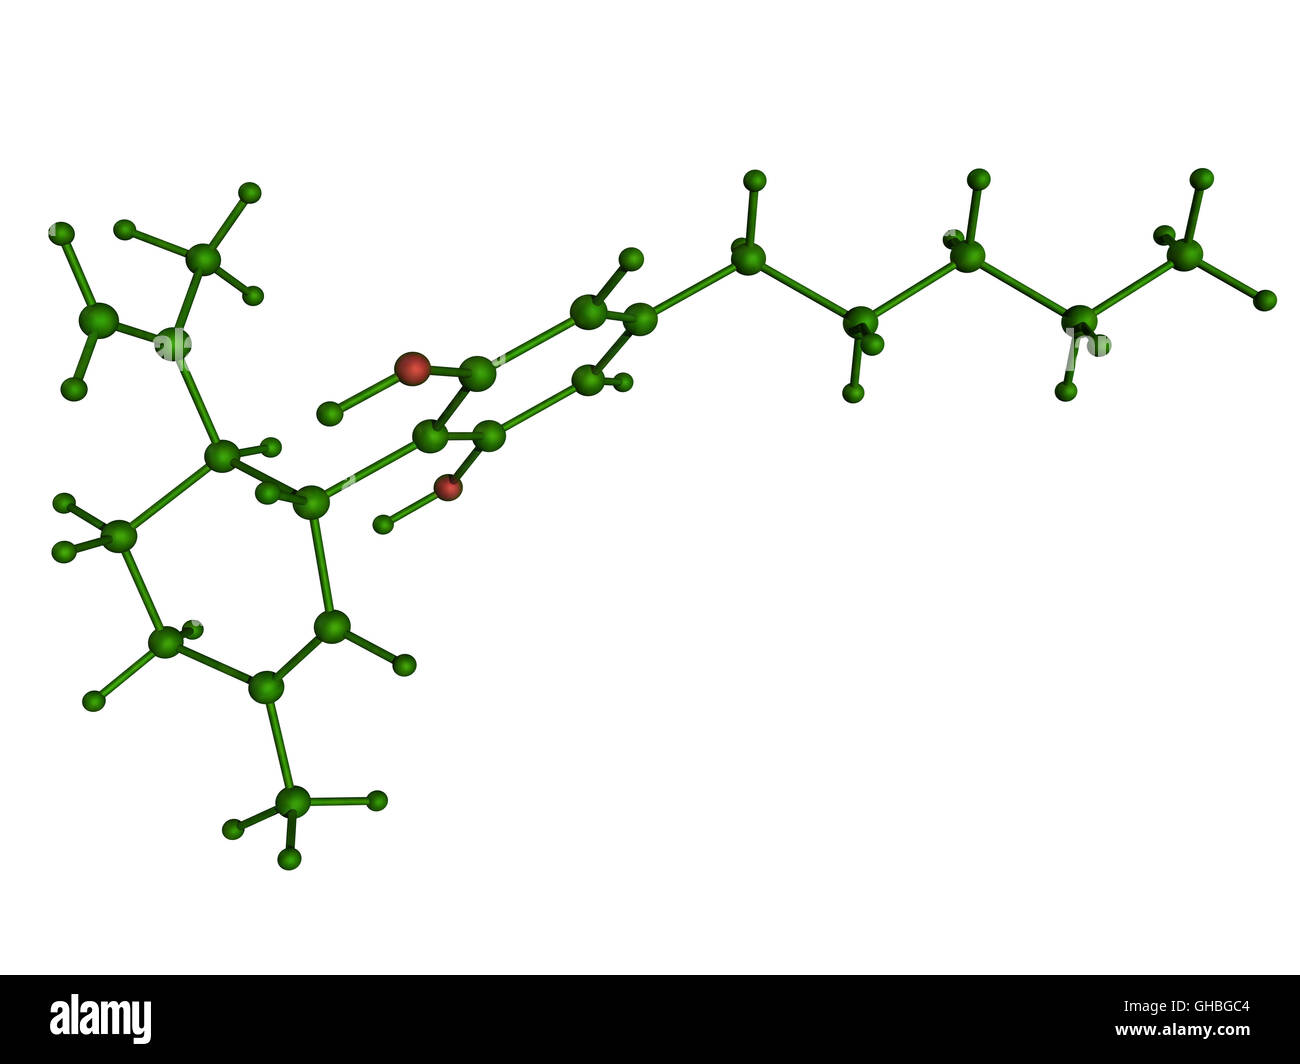 3D illustration of a Cannabidiol molecule-one of  the active cannabinoids identified in cannabis. Stock Photo